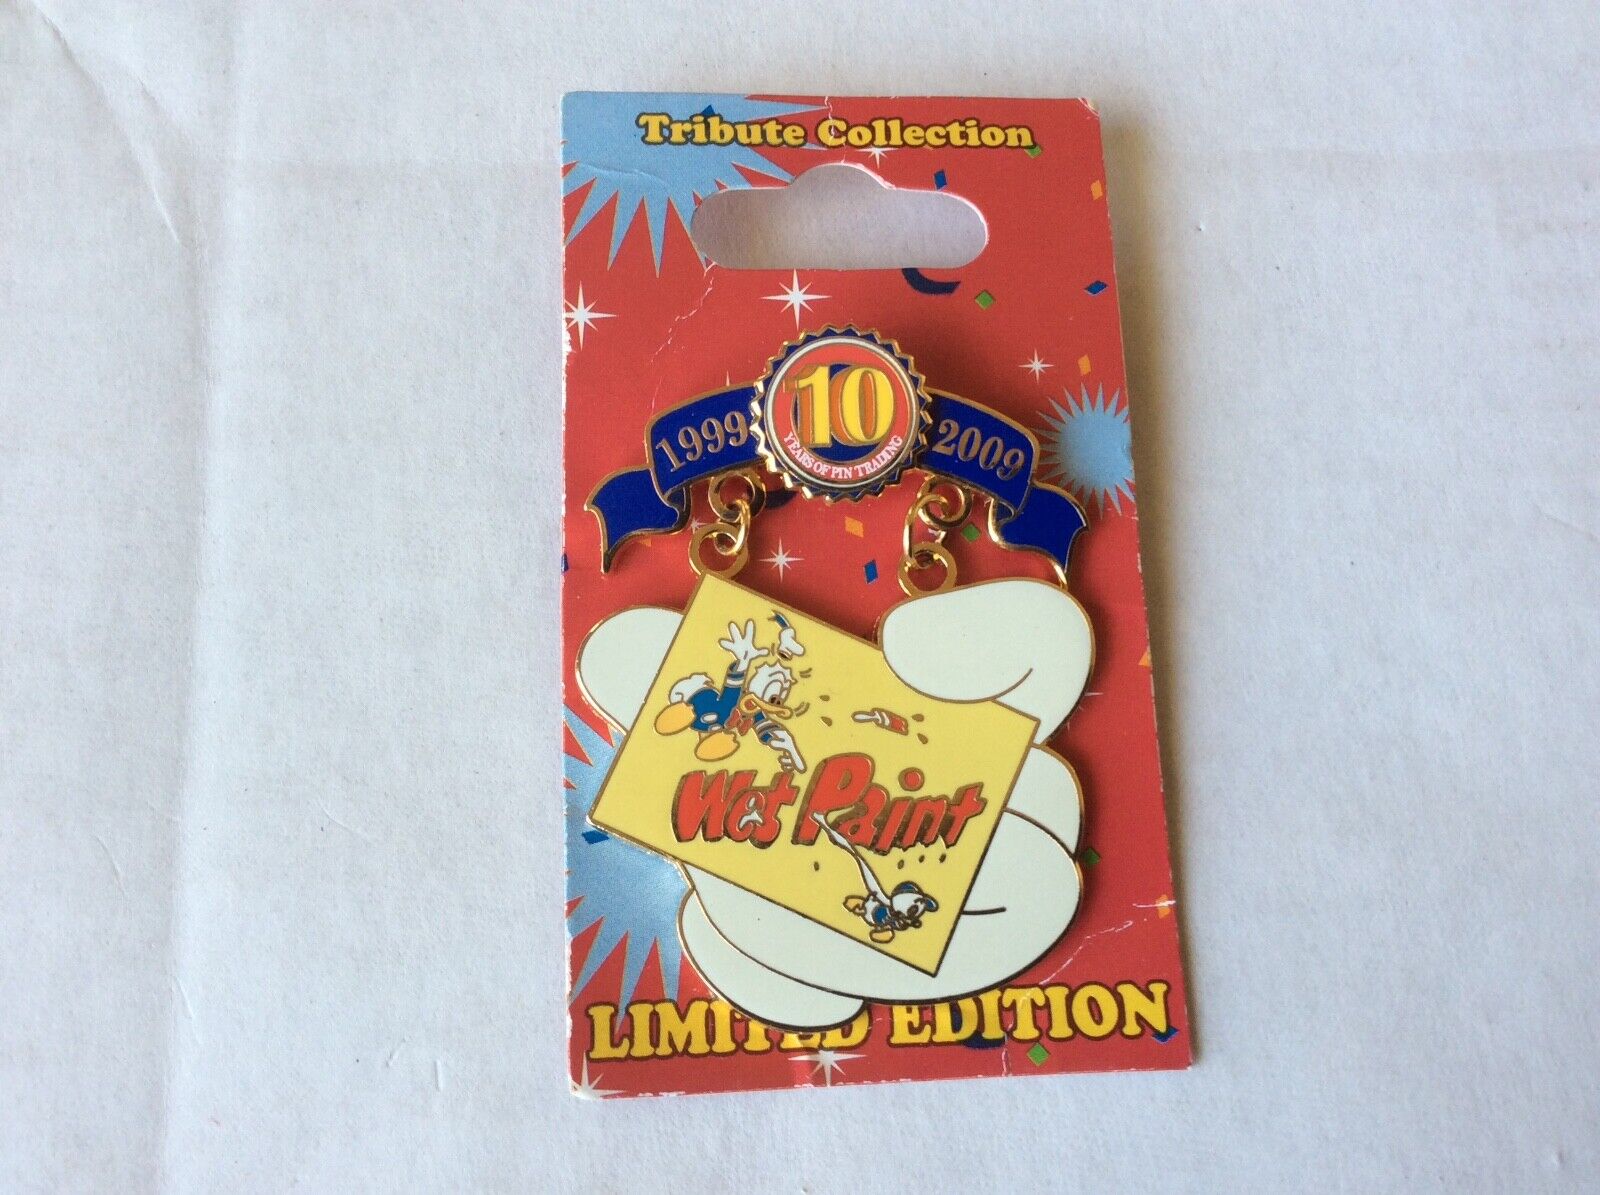 2010 Disney Tribute Collection Donald Duck Wet Paint 10 Years of Trading LE 1000